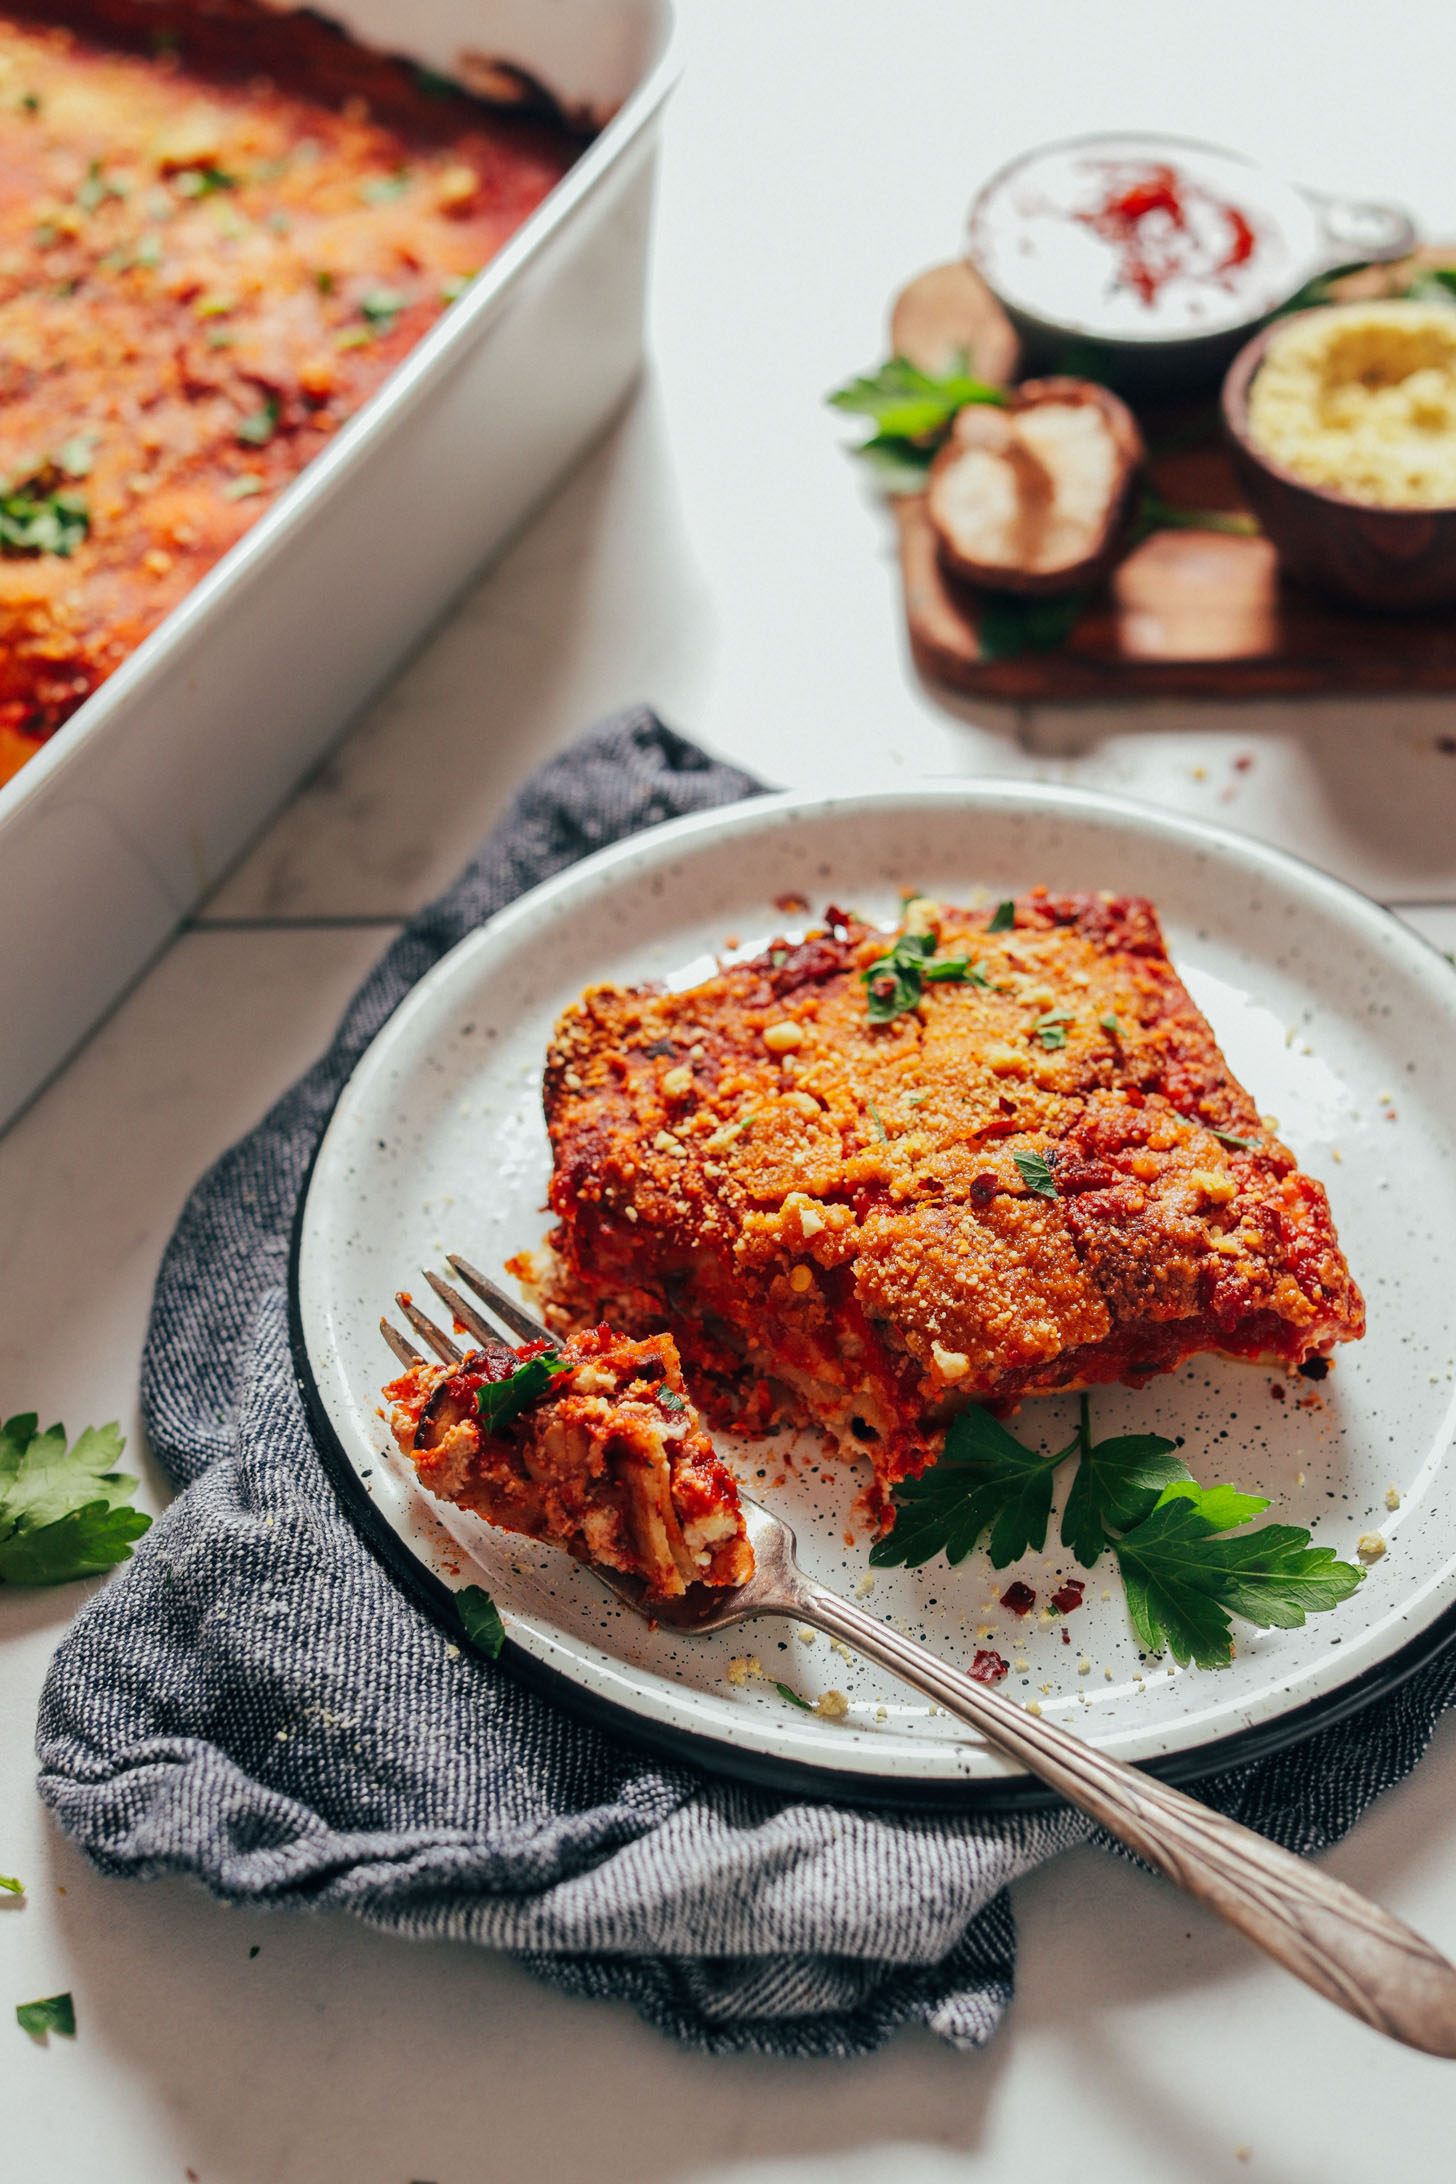 Using a fork to grab a bite of our flavorful Vegan Lasagna recipe